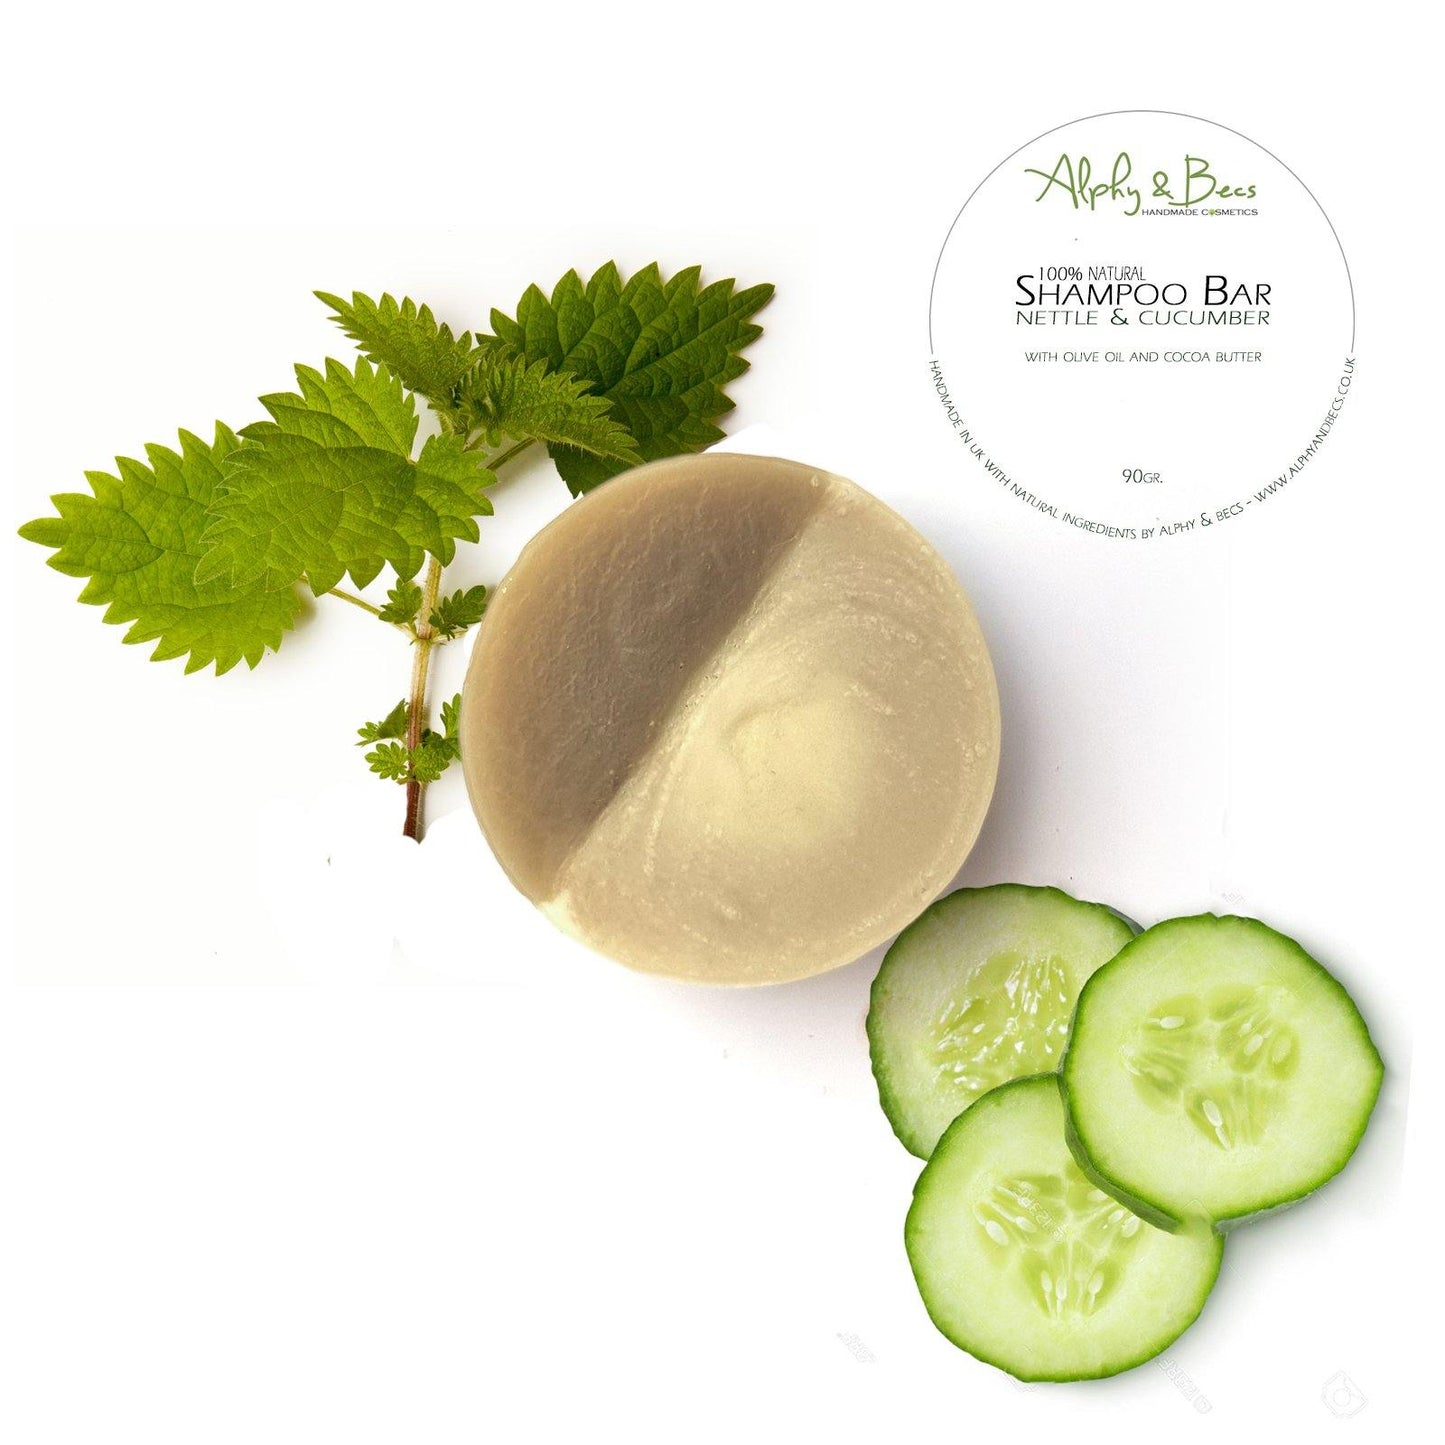 Natural Shampoo Bar - Nettle & Cucumber witn Olive Oil and Cocoa Butter - 90gr. - Alphy & Becs